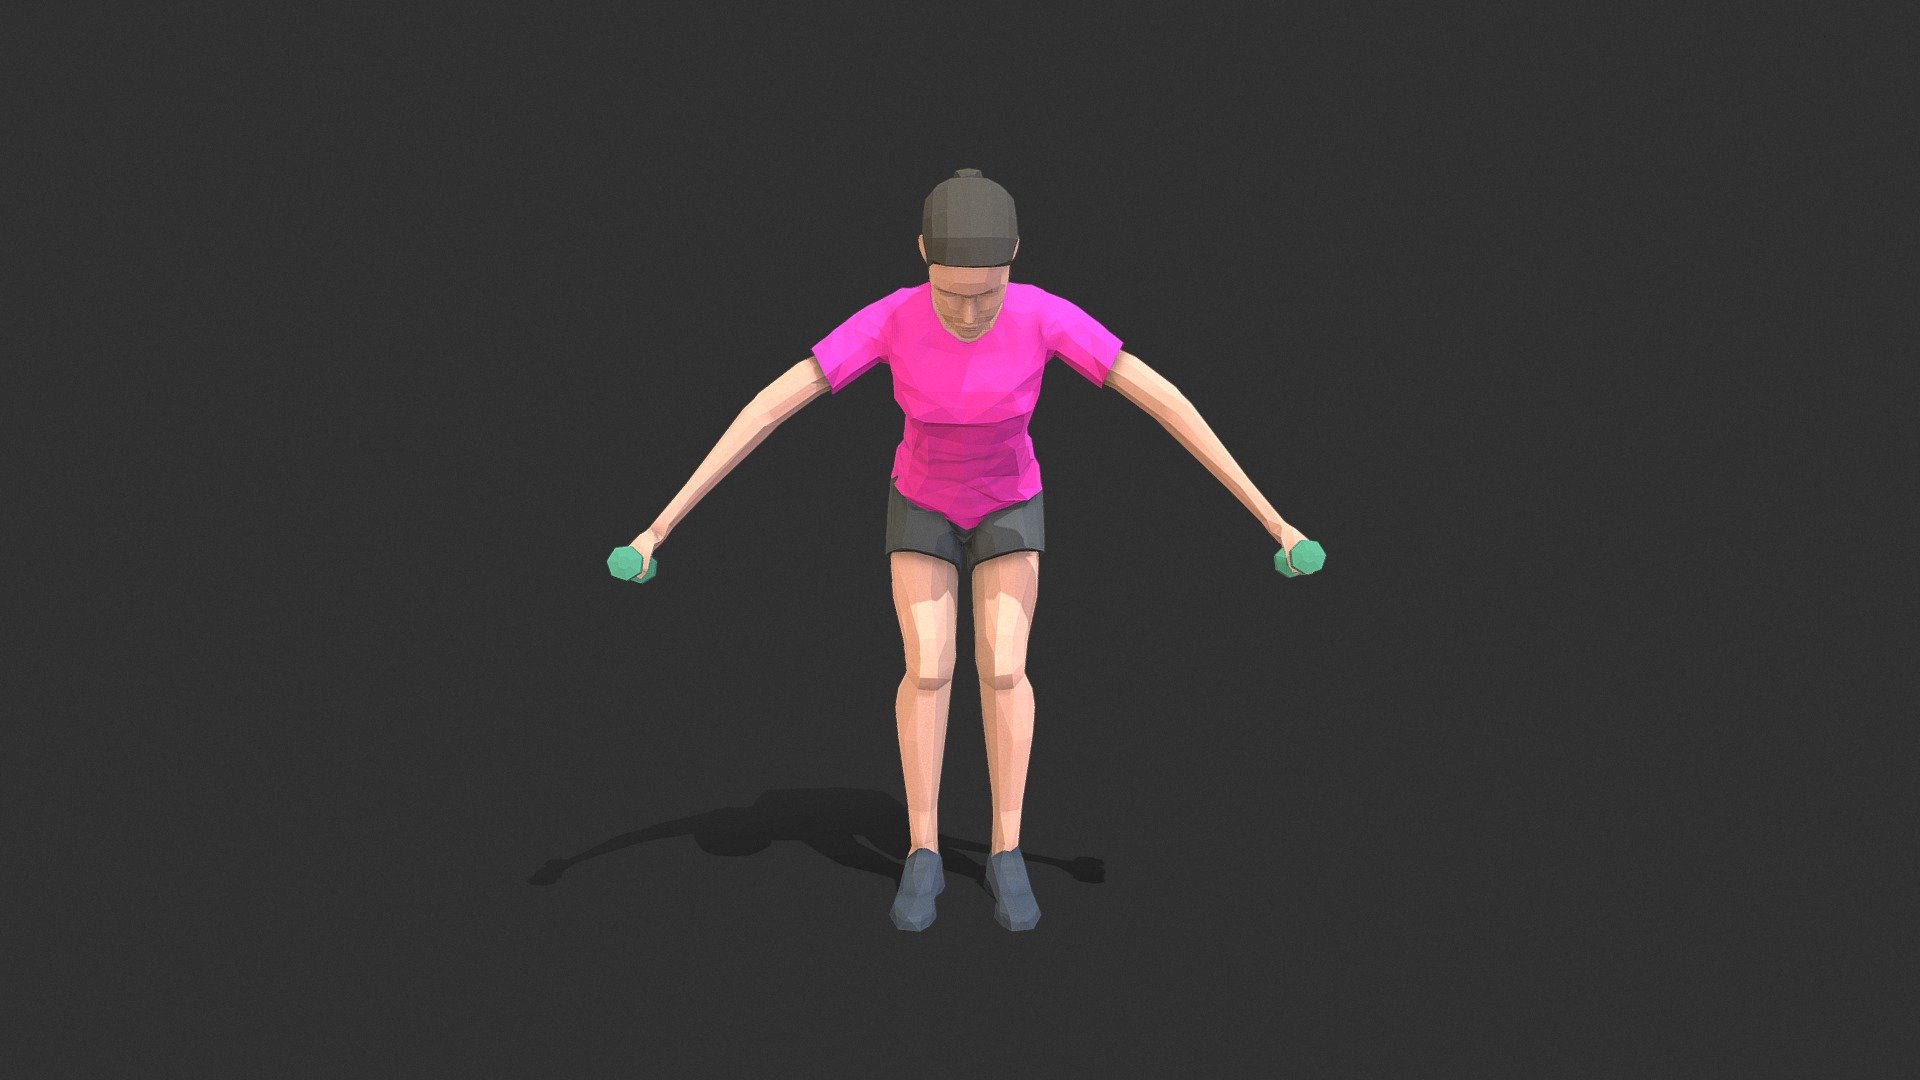 Animations of exercise Woman Low poly 3d model in flat surface style 3d model